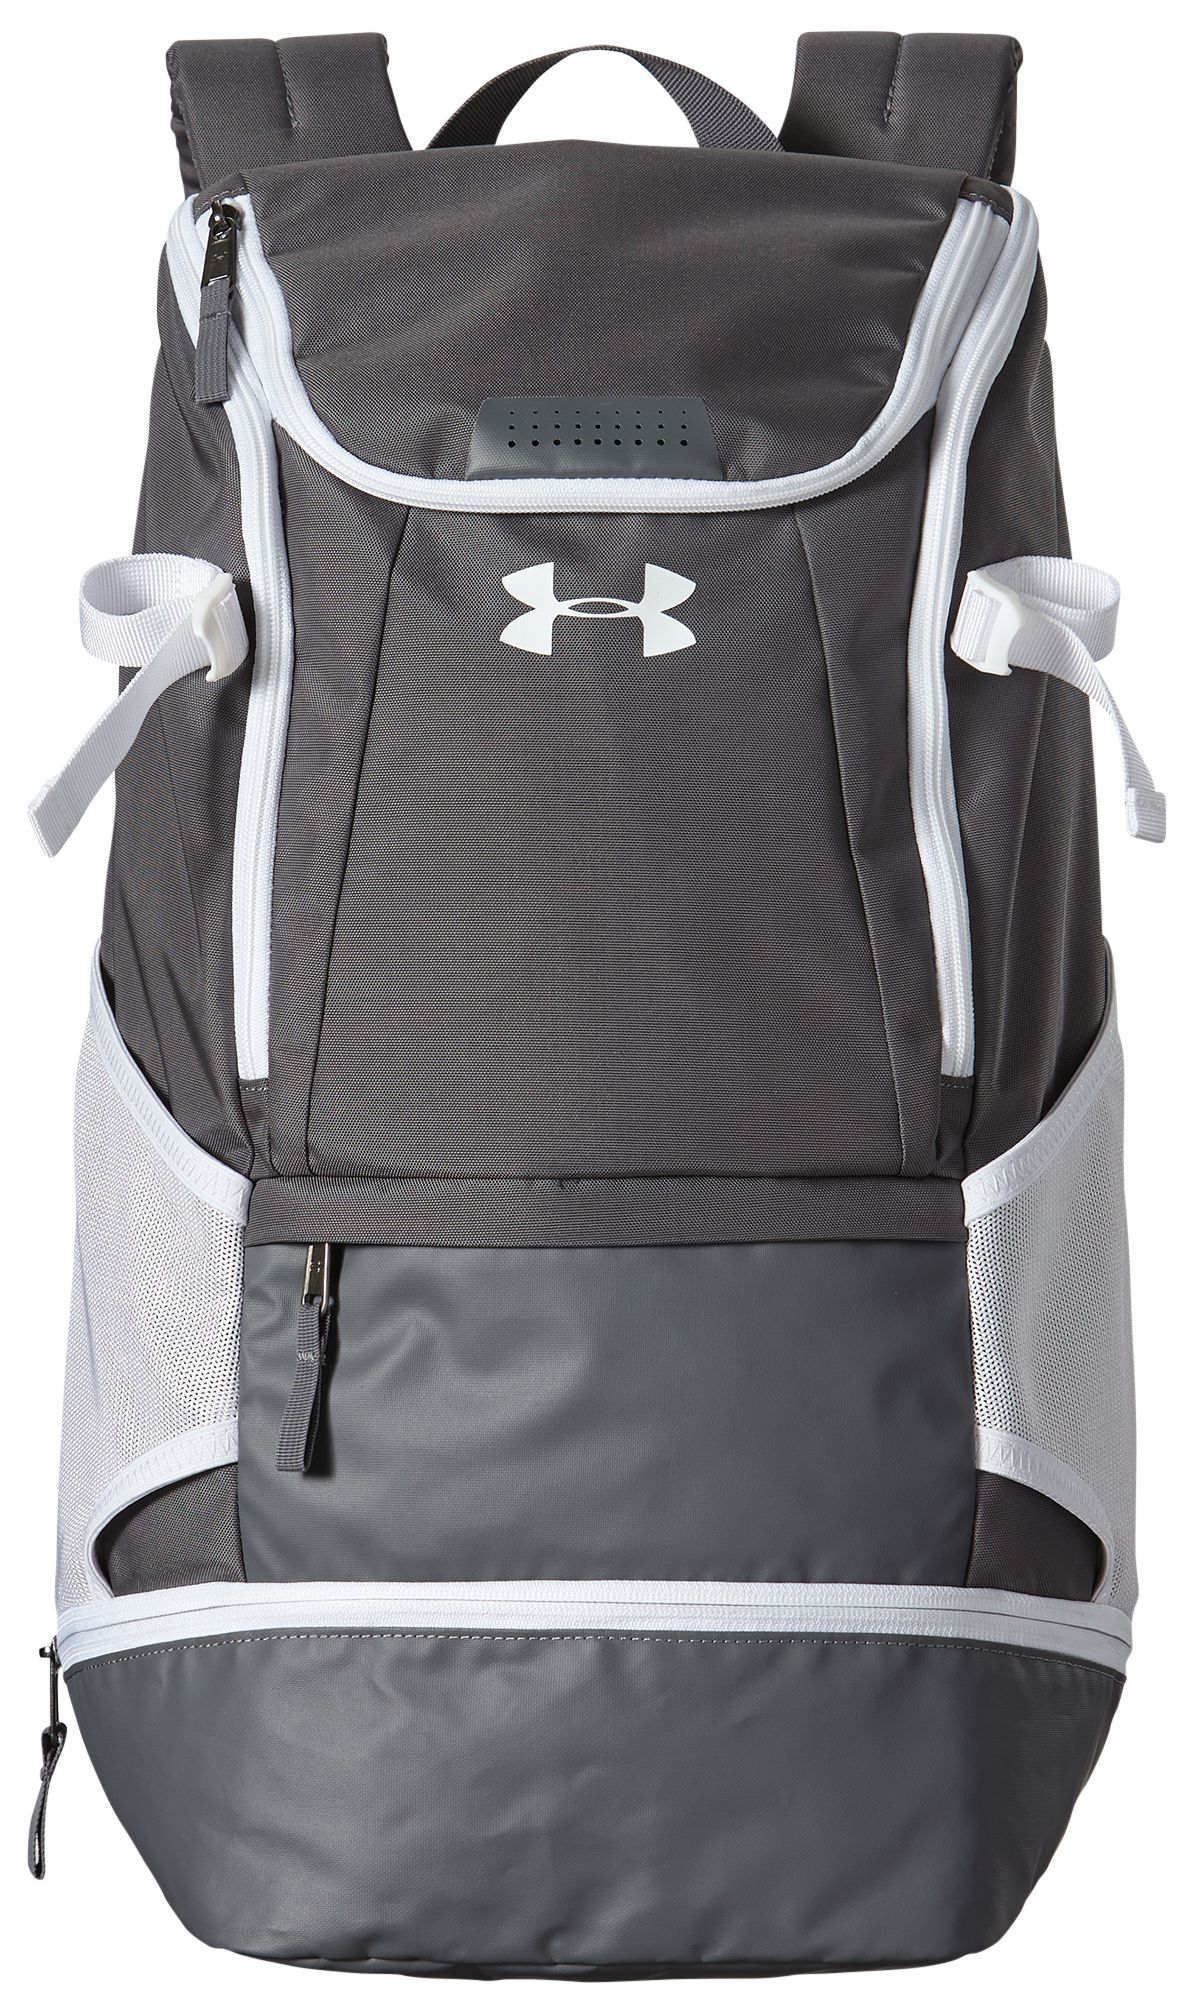 Under Armour Women's Lacrosse Backpack 